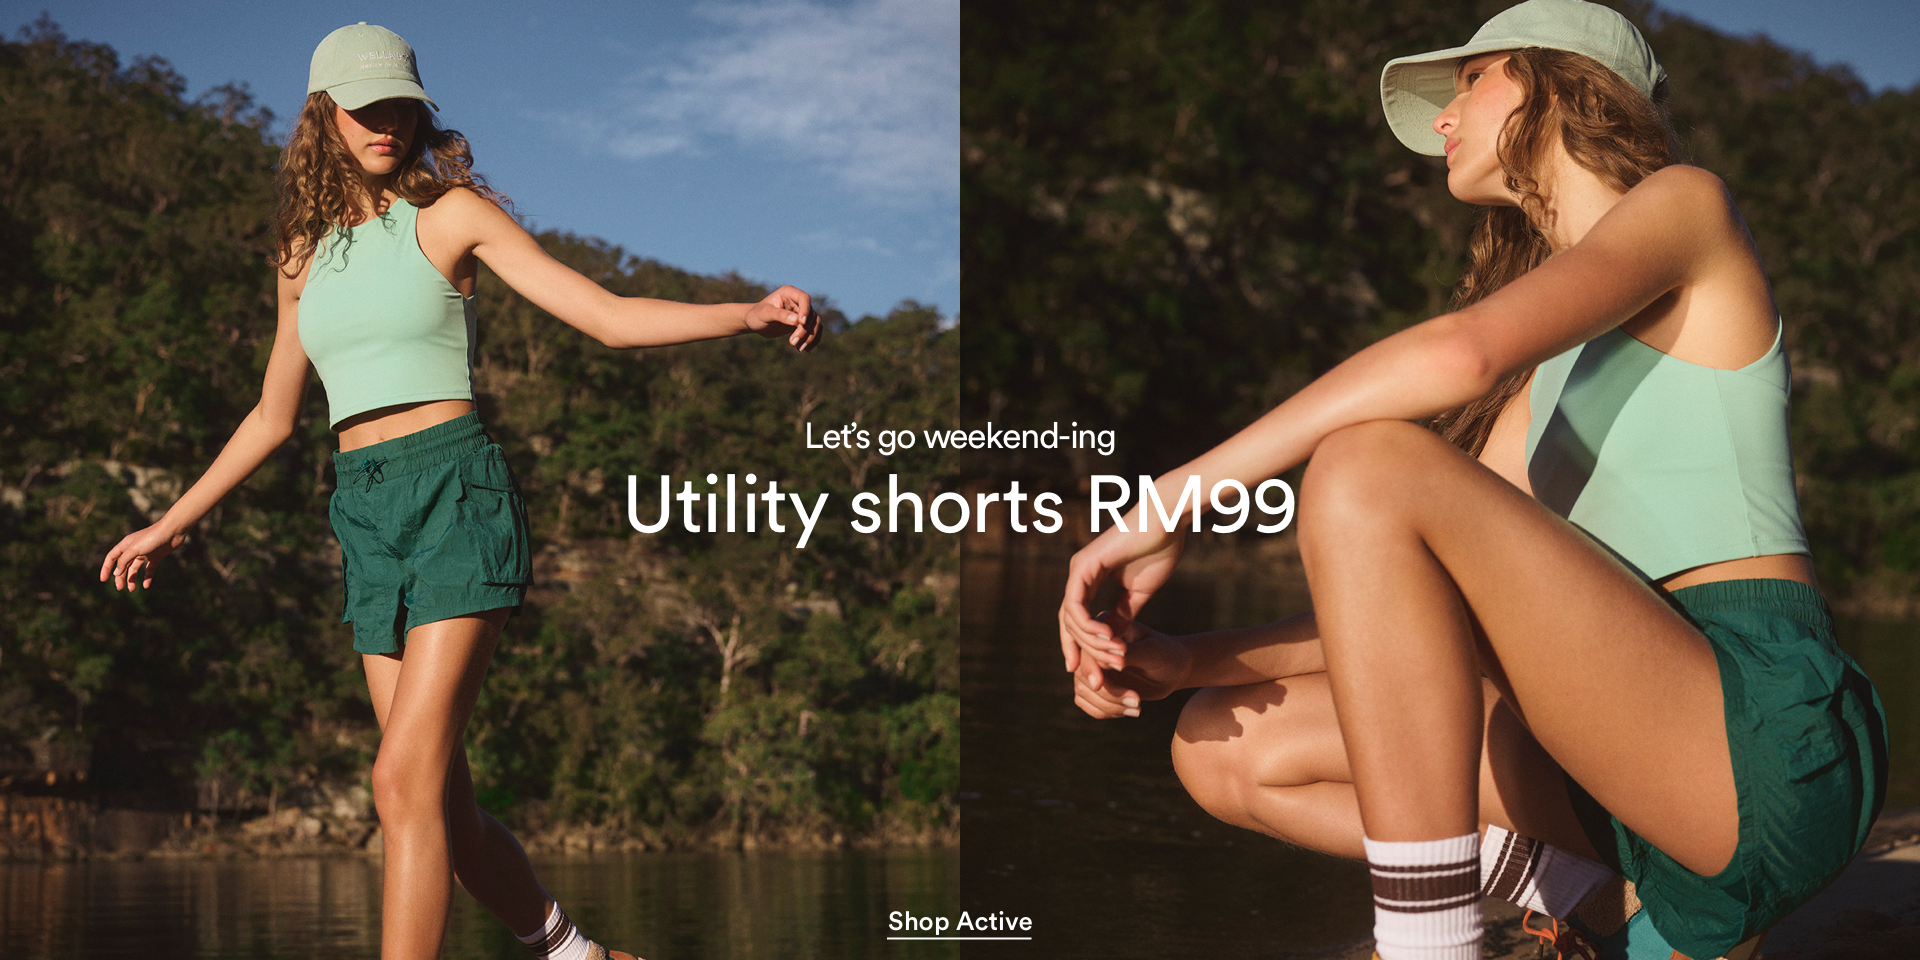 Let's go weekend-ing. Utility shorts RM99. Click to Shop New in Active.